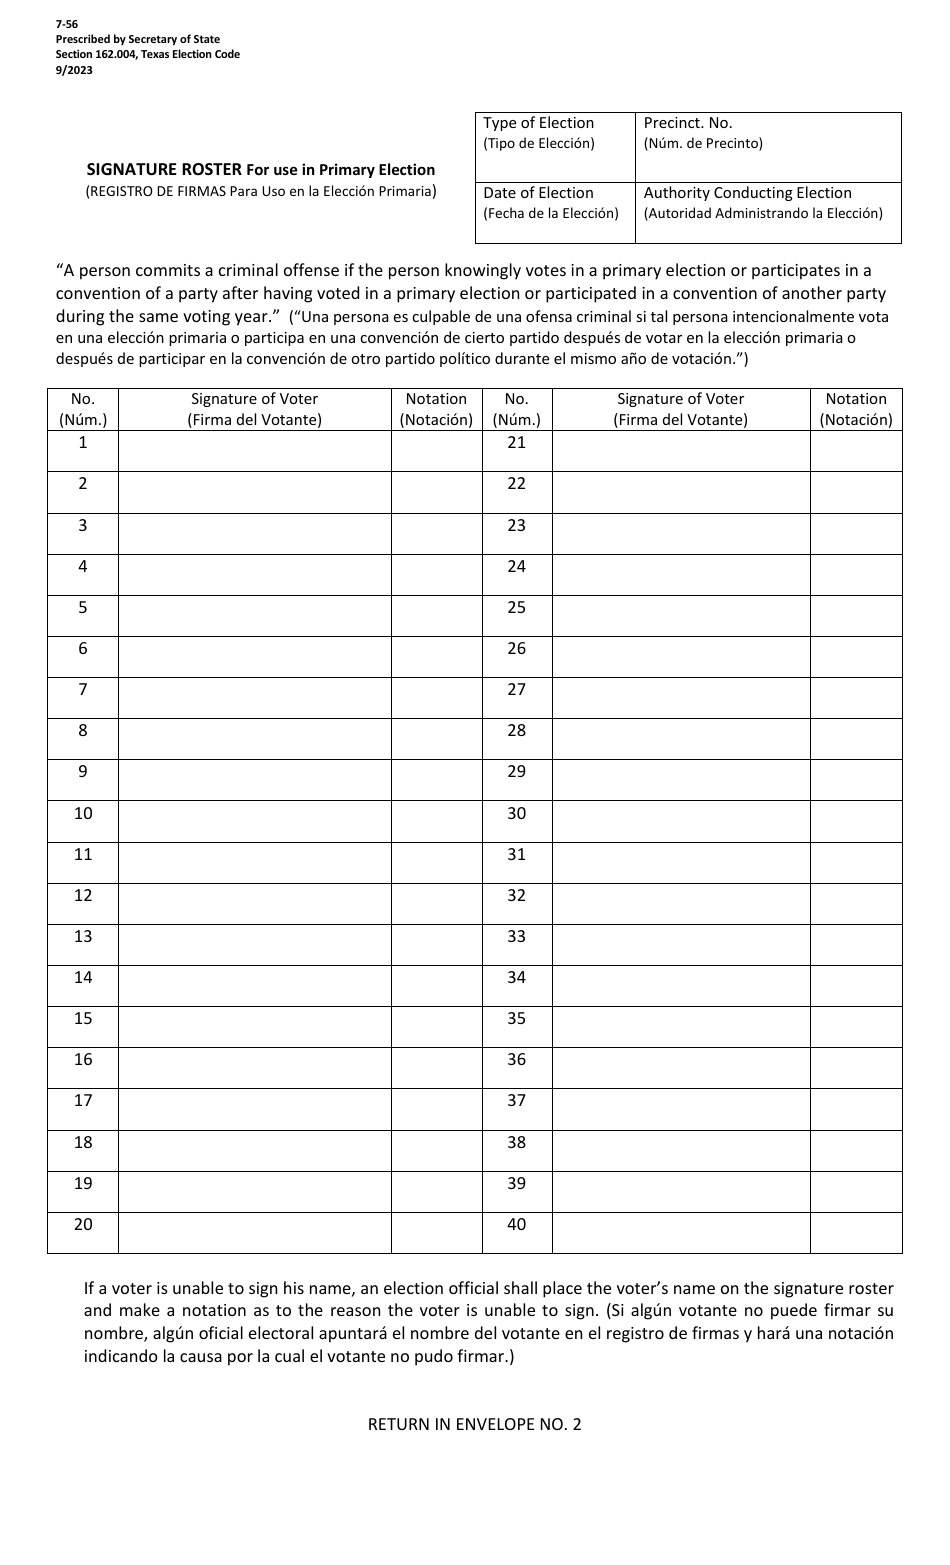 Form 7-56 Signature Roster for Use in Primary Election - Texas (English / Spanish), Page 1